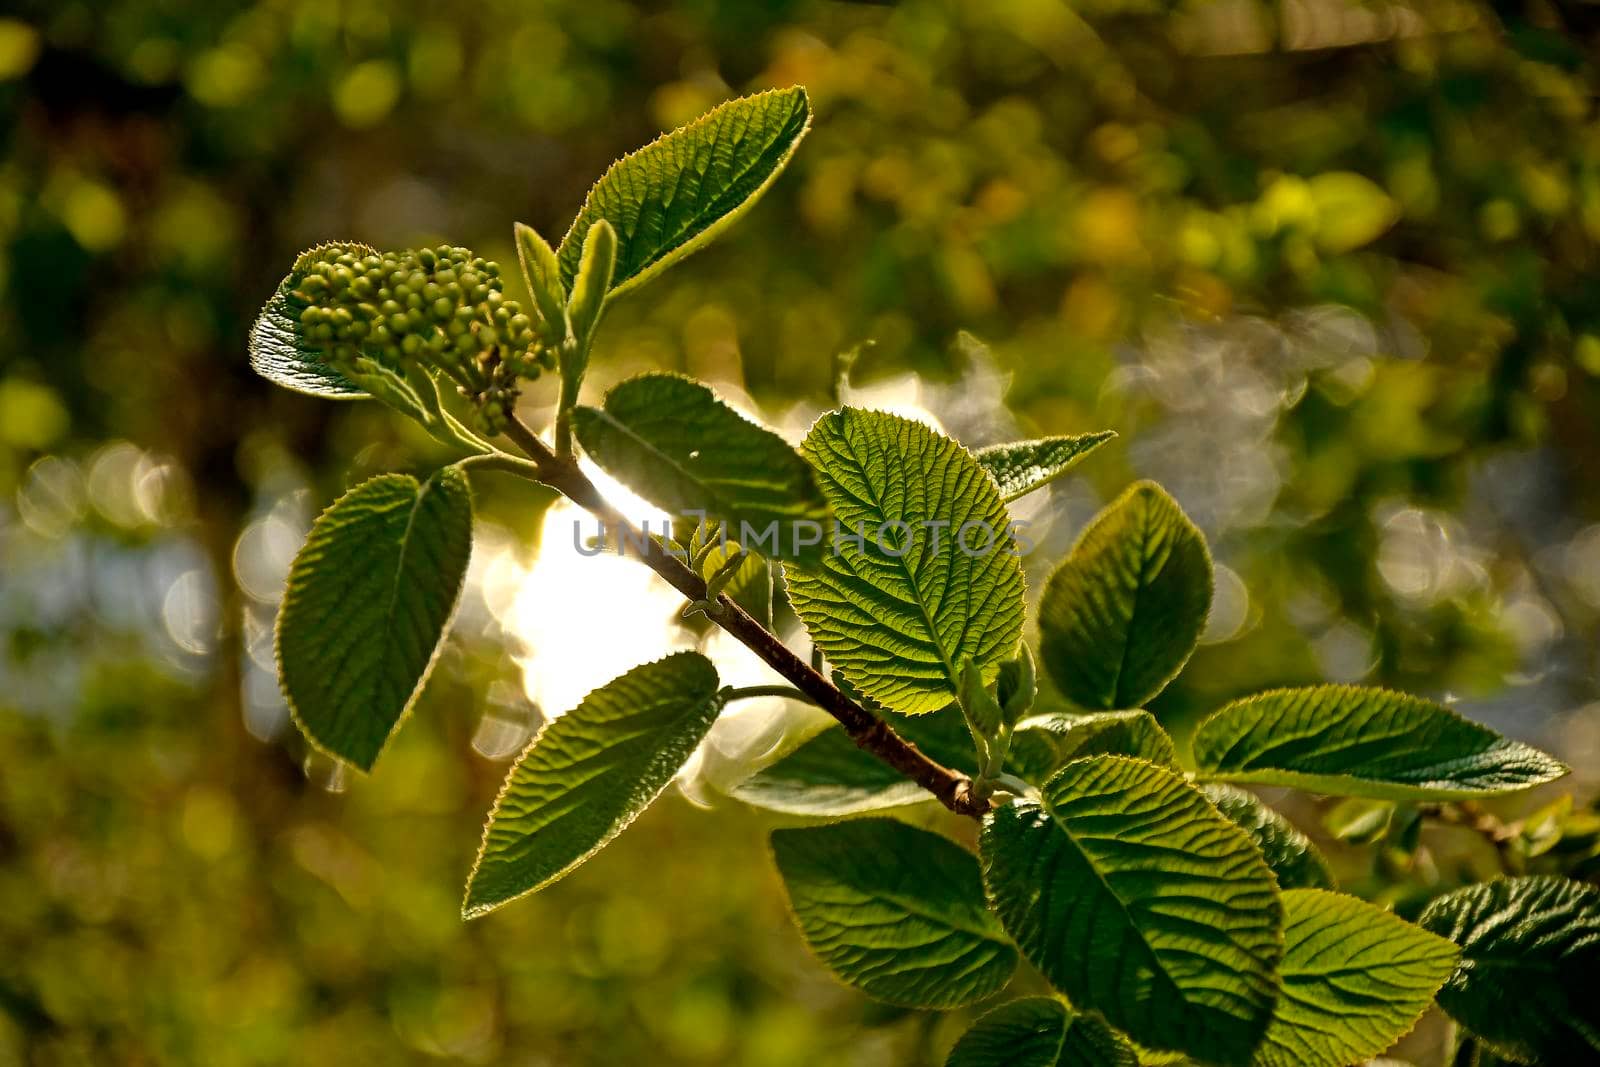 guelder rose, young fresh leaves in spring in backlit in Germany by Jochen